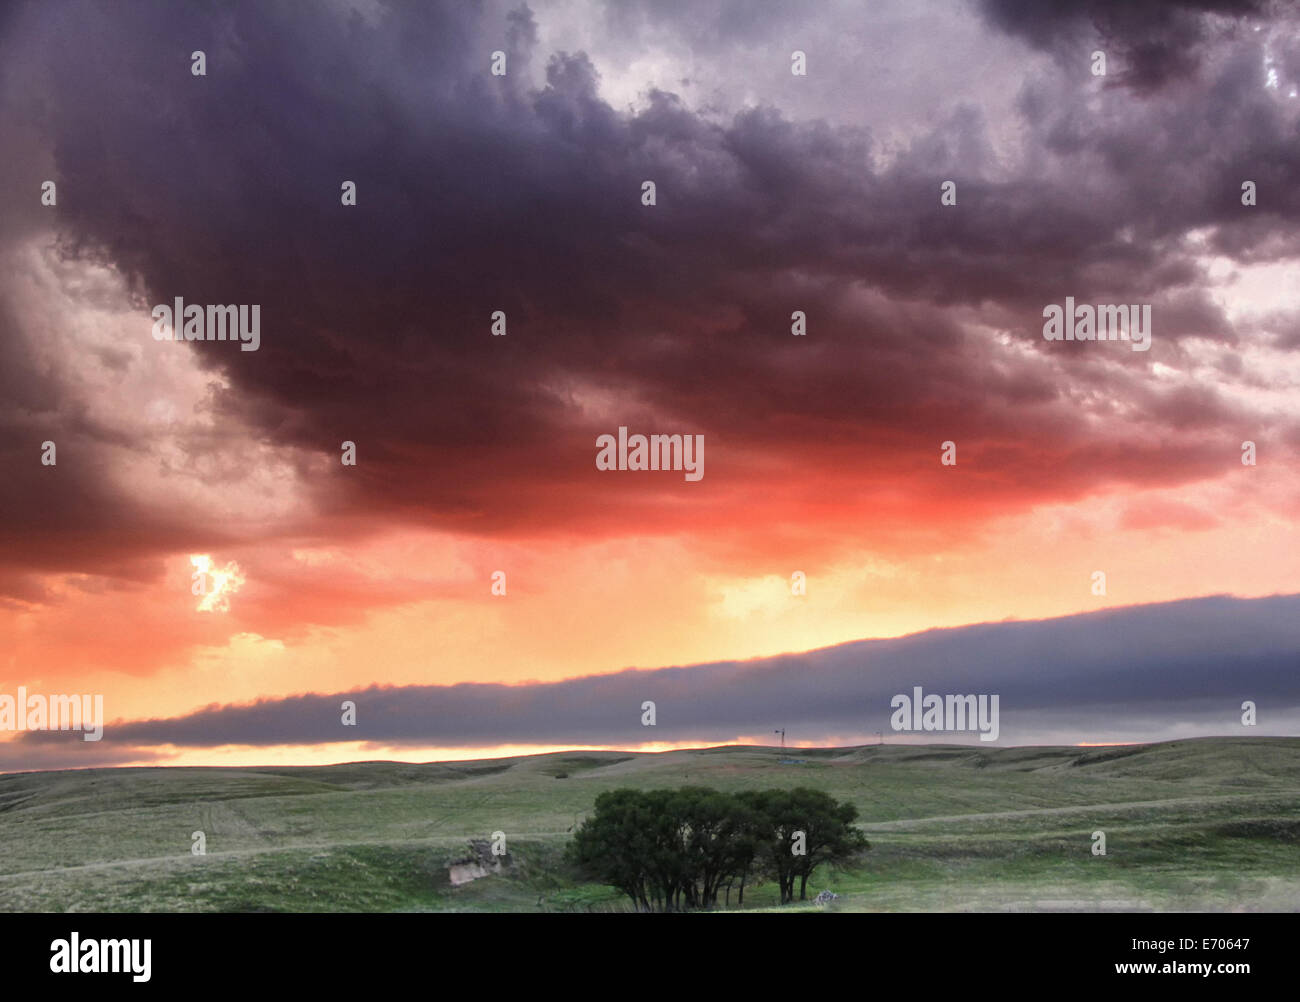 Roll cloud hangs low in the distance with sunset colors reflecting ongoing storm convection, Lexington, Nebraska, USA Stock Photo